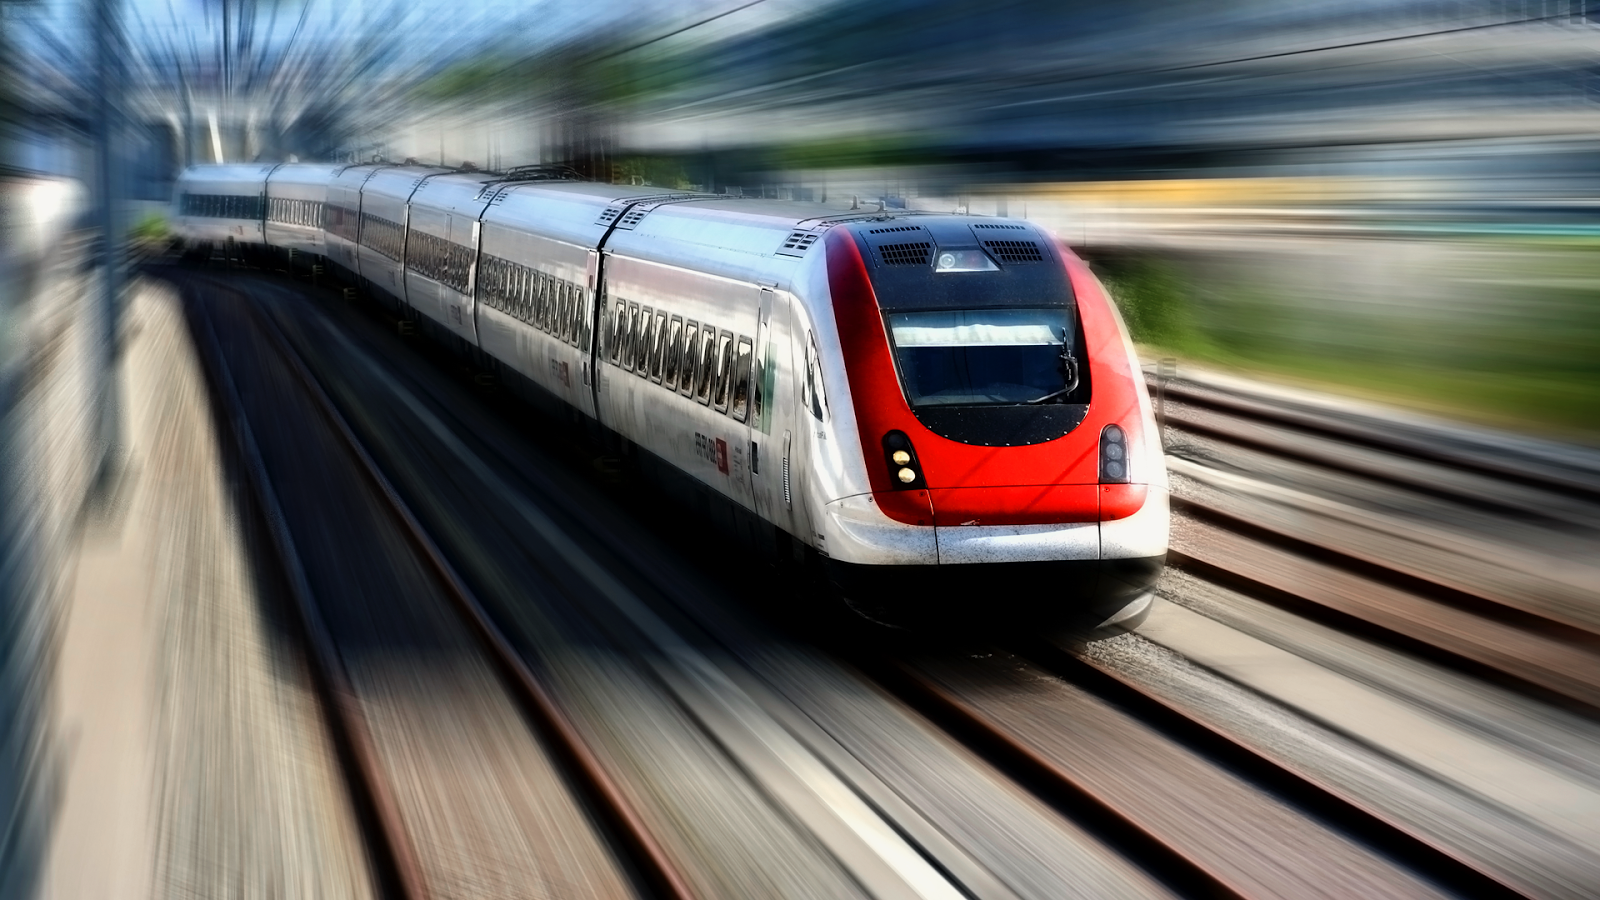 High Speed Bullet Train HD Wallpaper 11 Of Train Image HD Wallpaper & Background Download